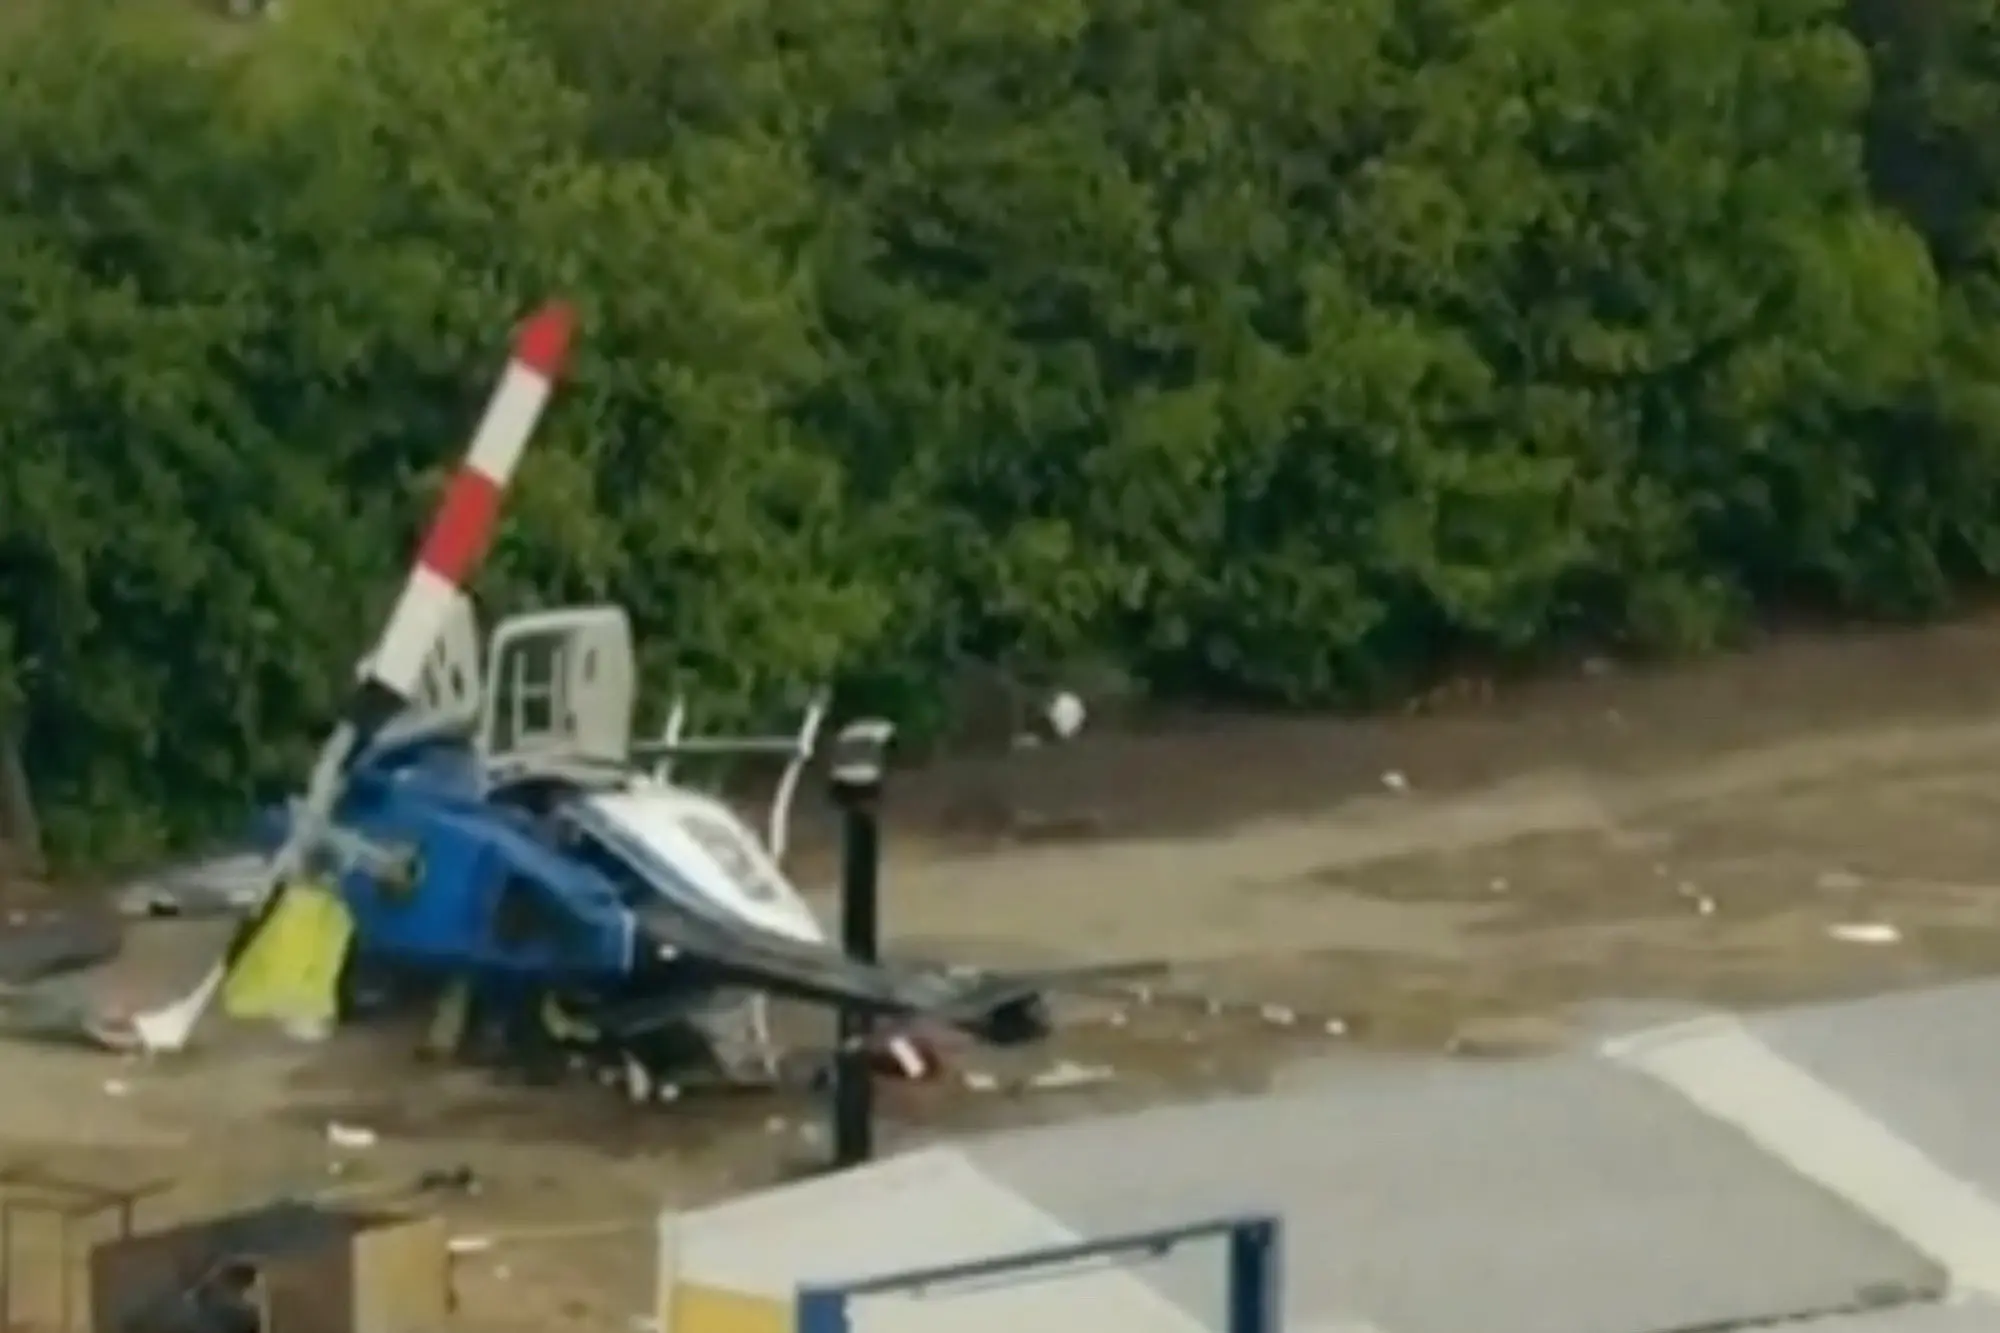 Helicopter crashes in California